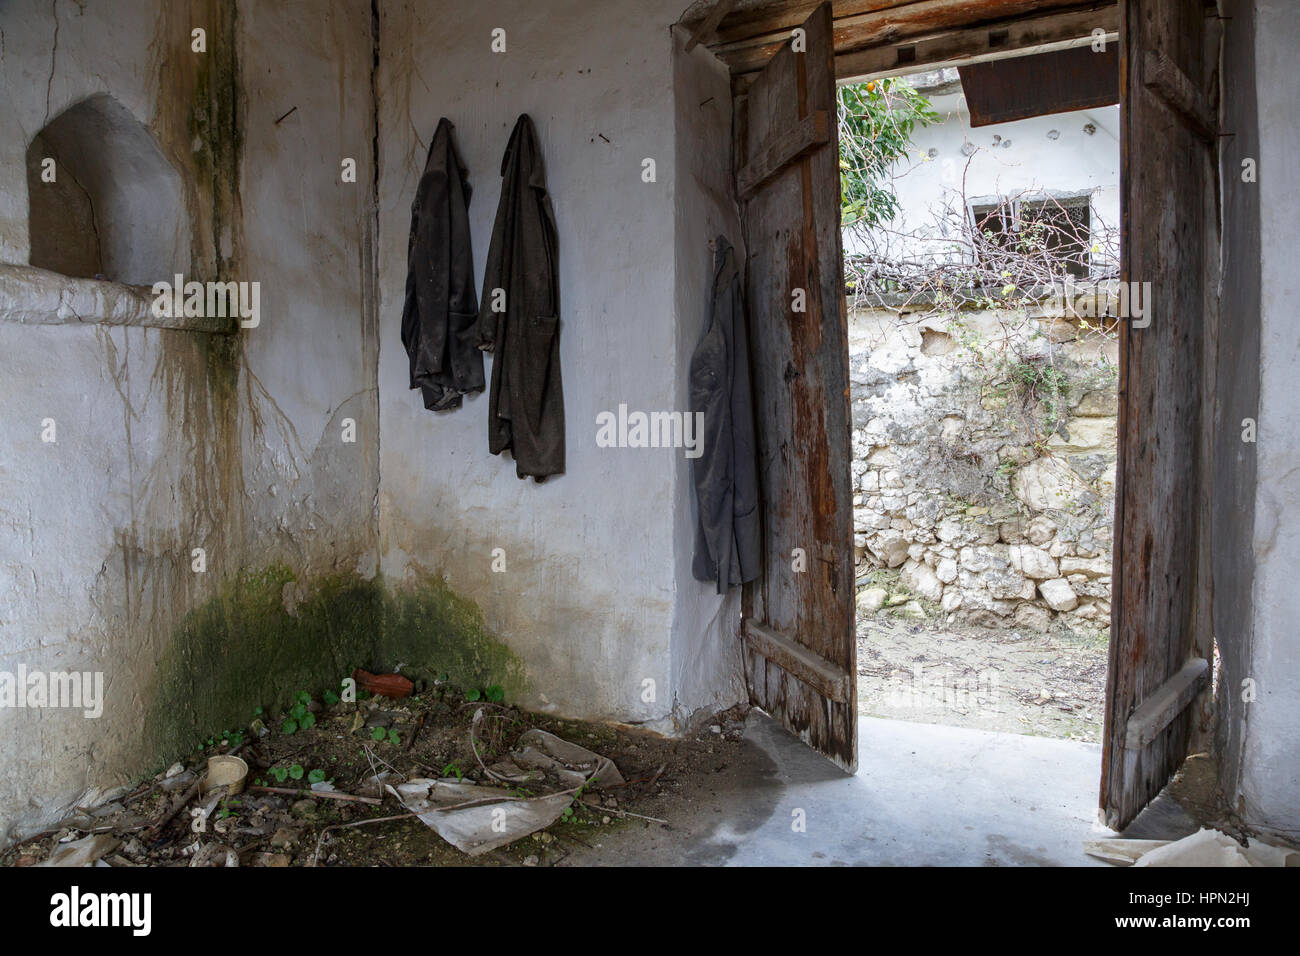 Posessions Left Inside A House In The Abandoned Village Of Old Stock Photo Alamy